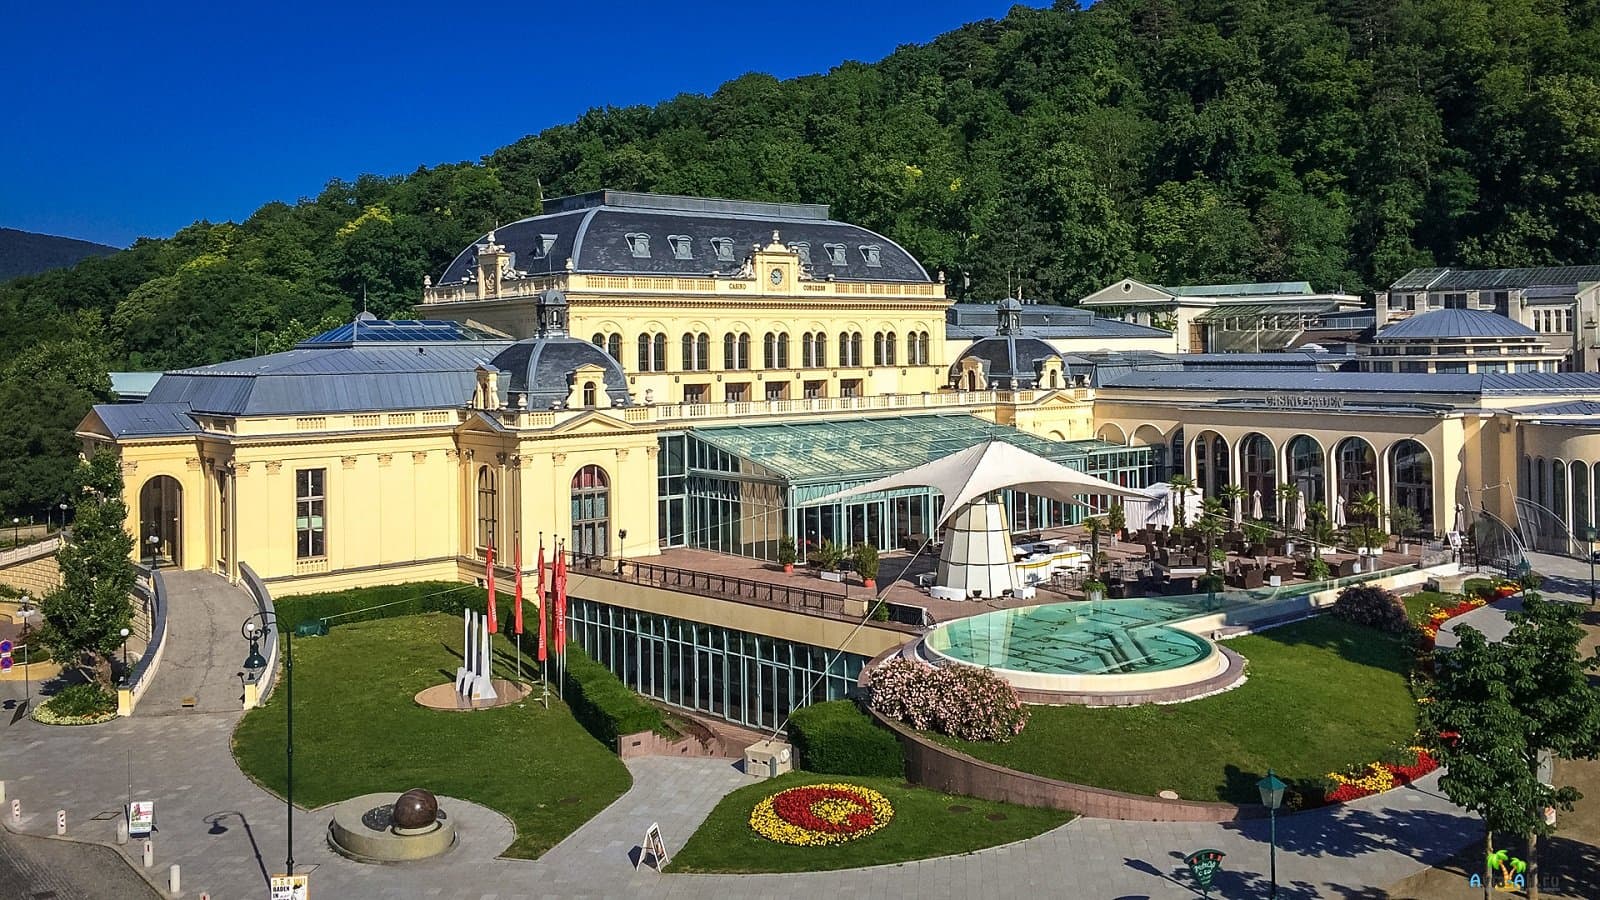 THE 10 BEST Austria Casinos You'll Want to Visit 